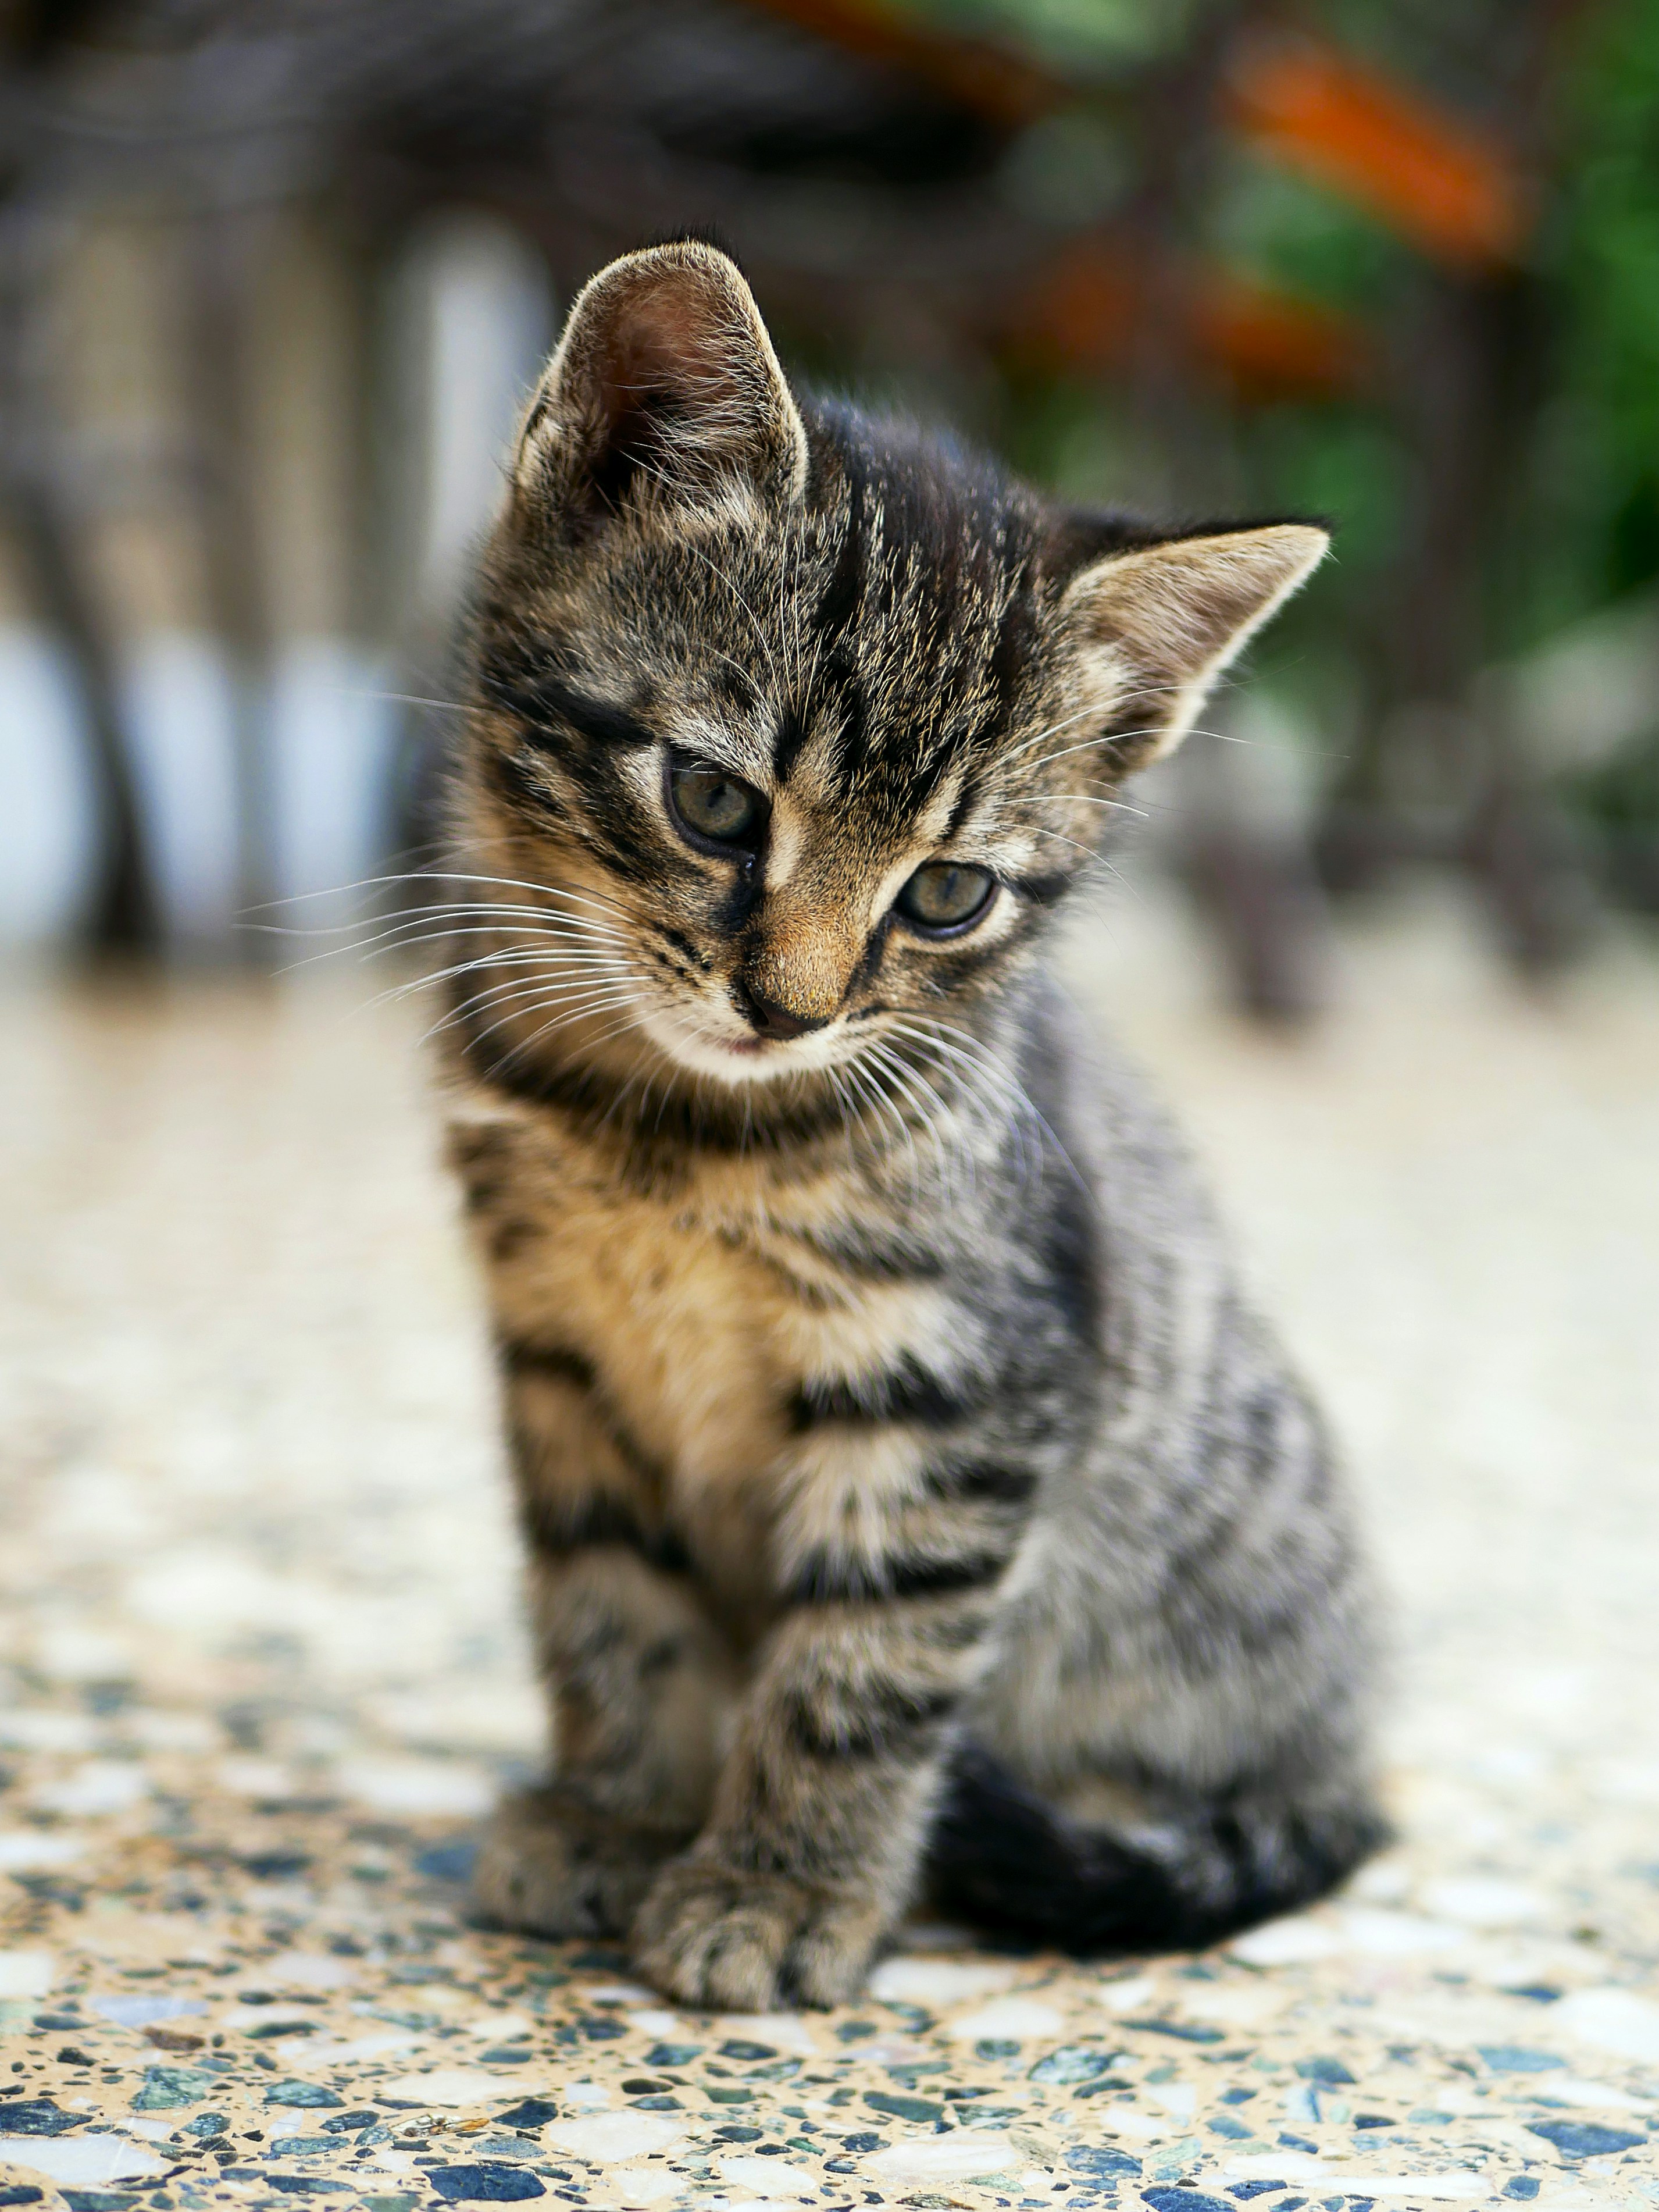 Little Cat Pictures | Download Free Images on Unsplash